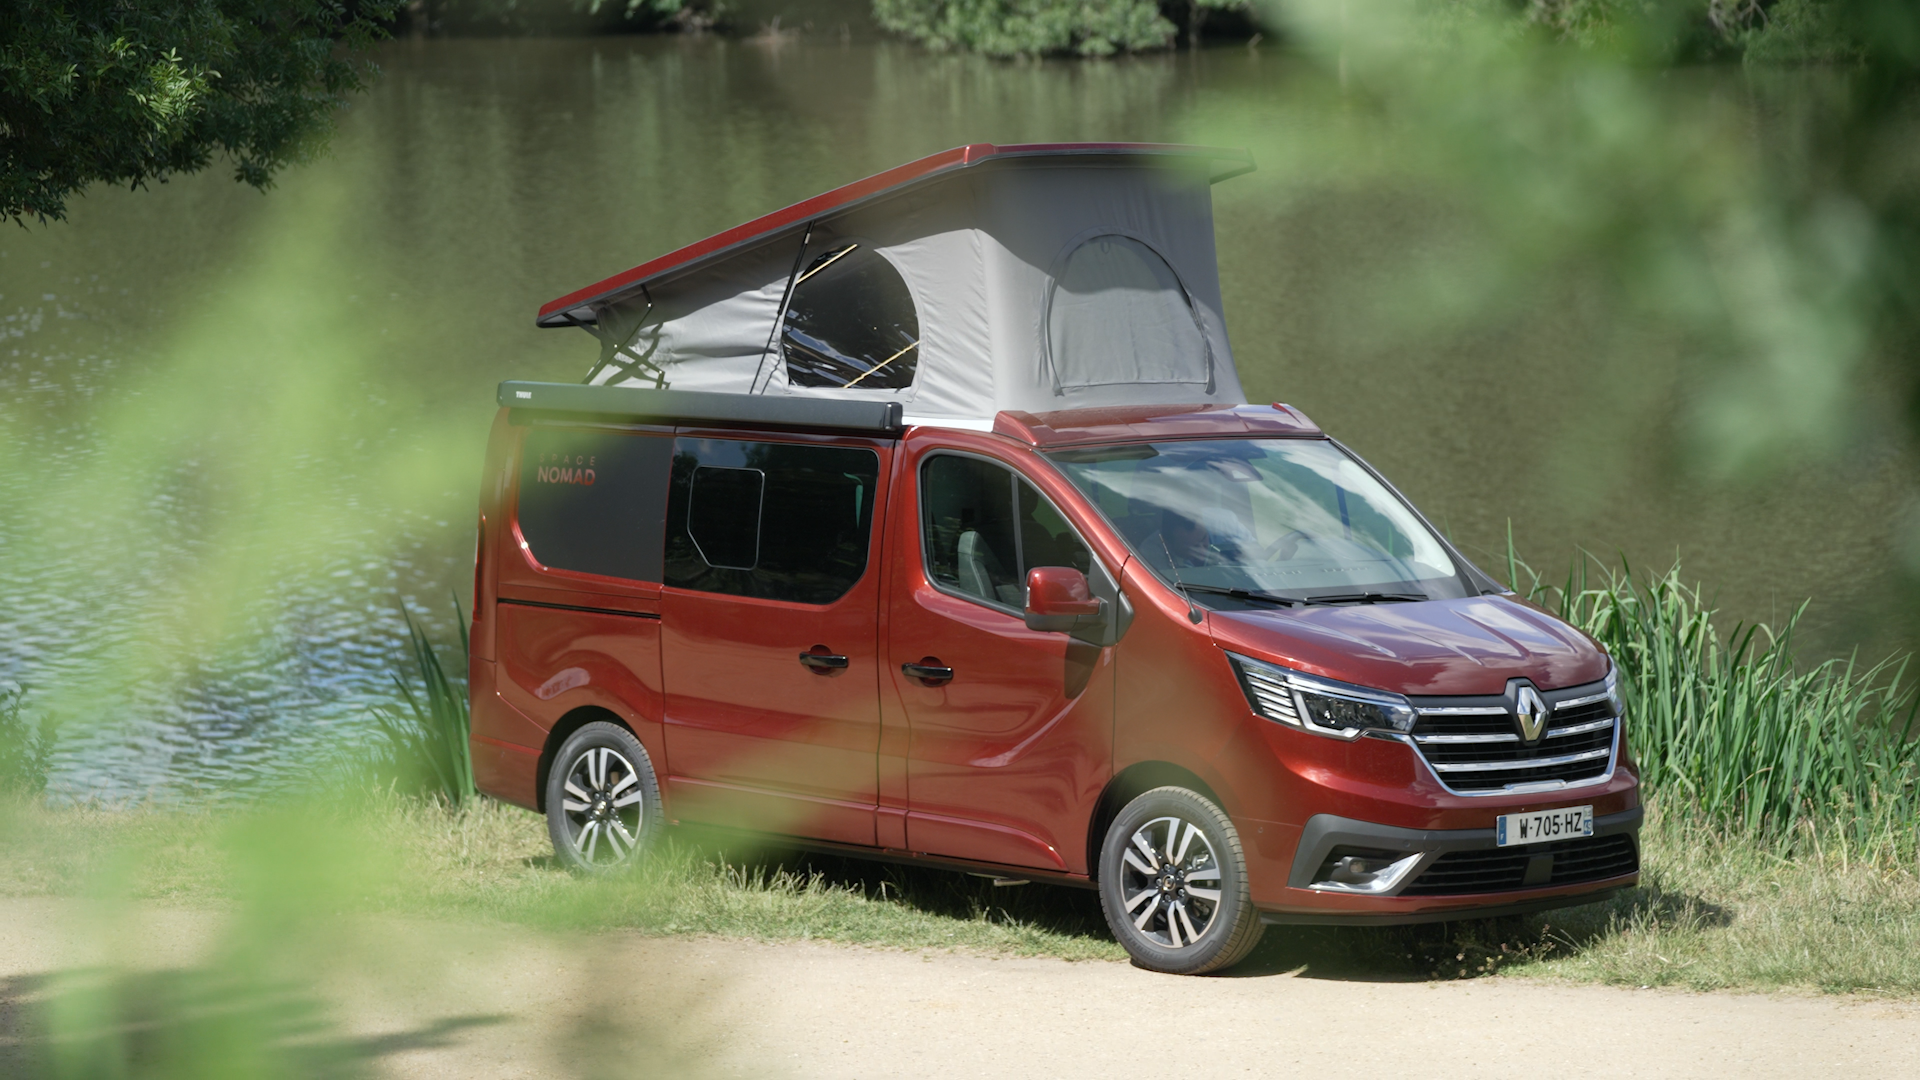 All-new Renault Trafic SpaceNomad: a solar panel for more freedom